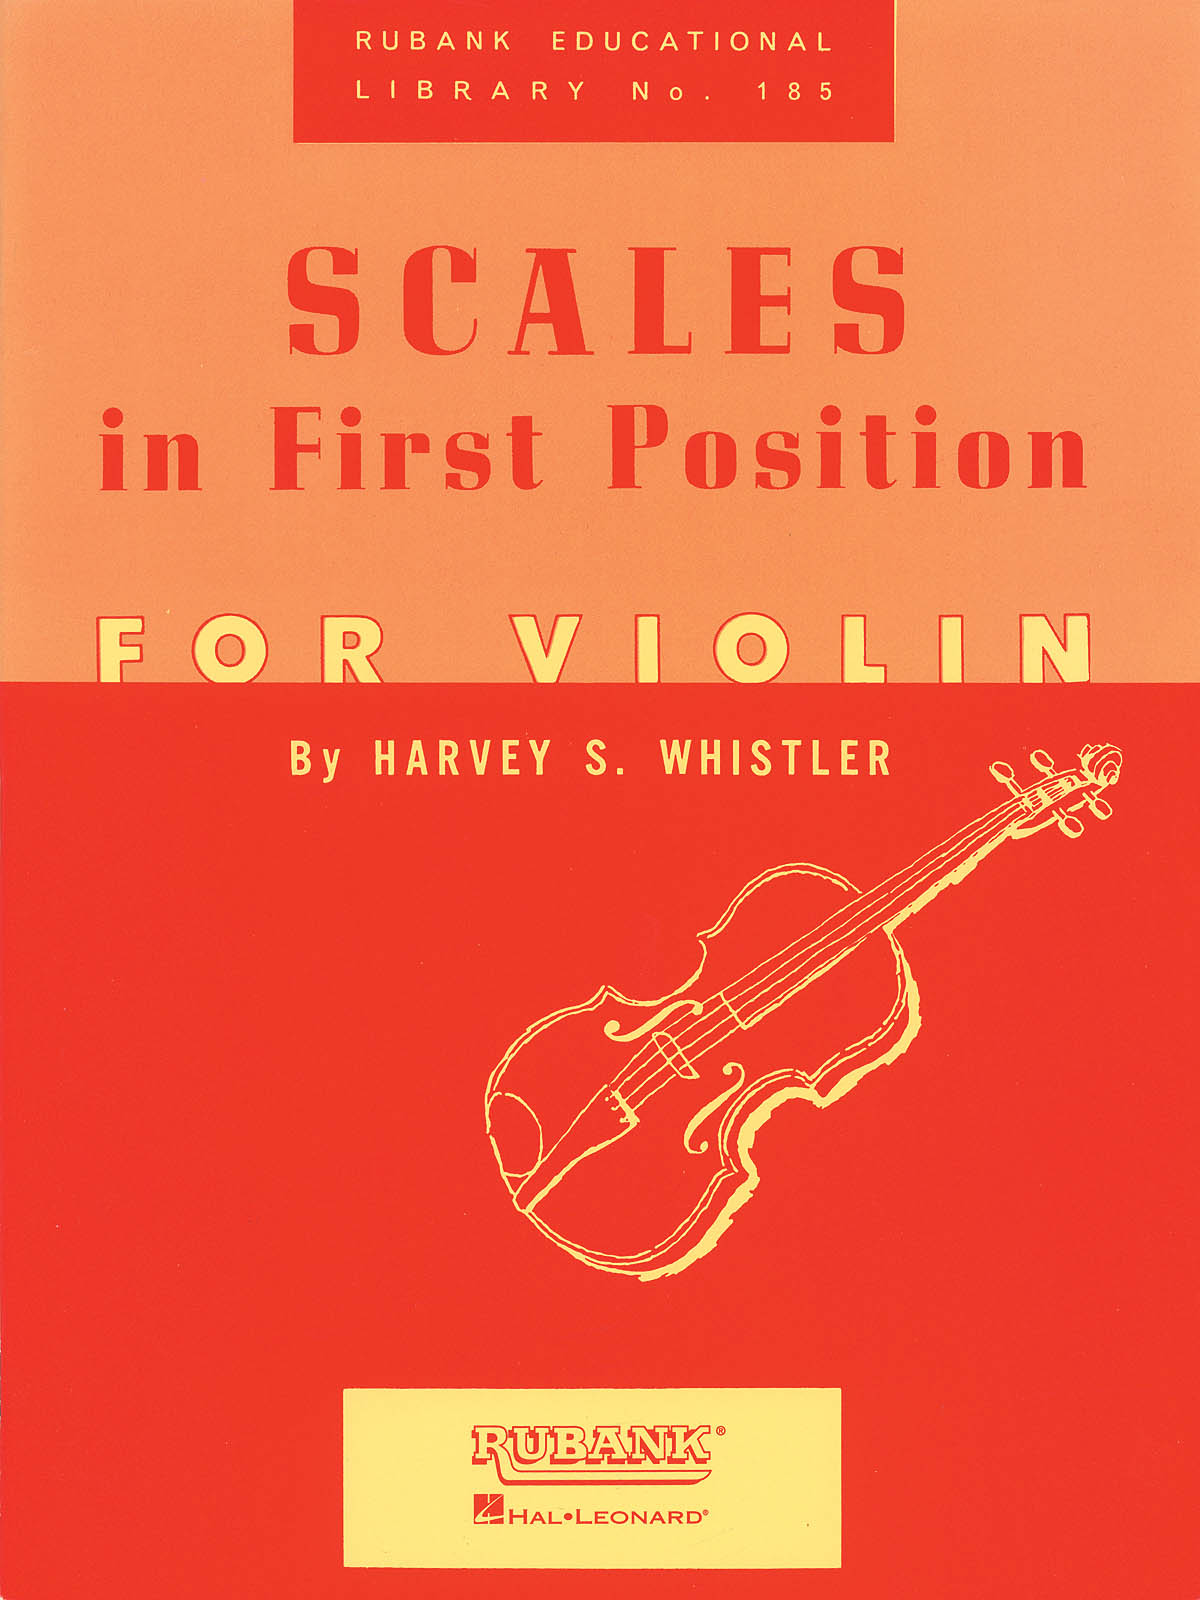 Violin Scales one String. Violin position. First position